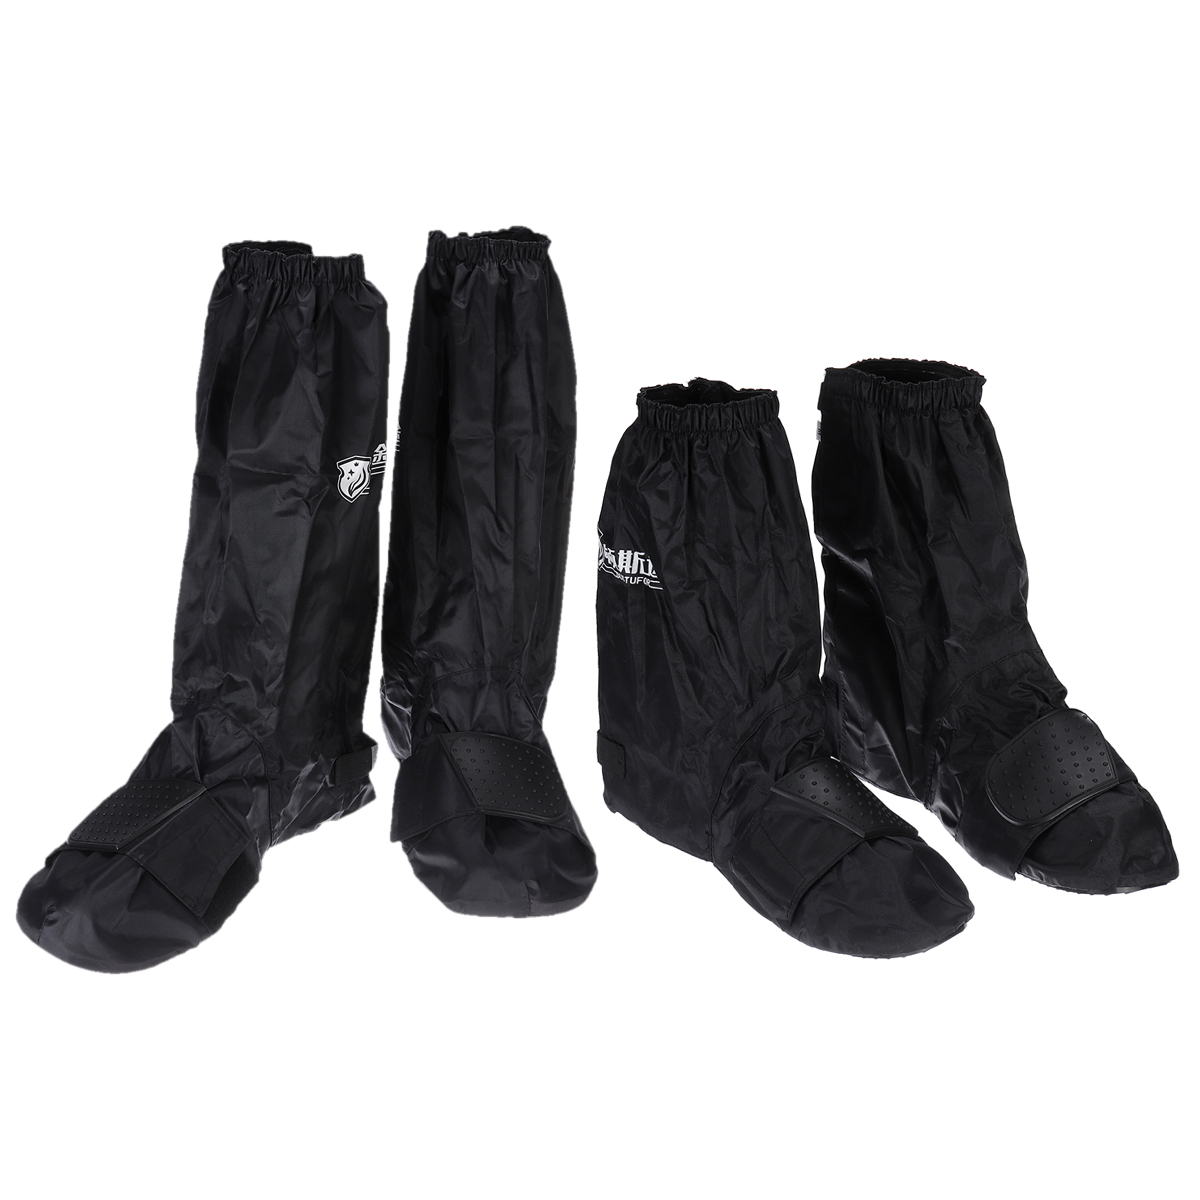 clean boot overshoes